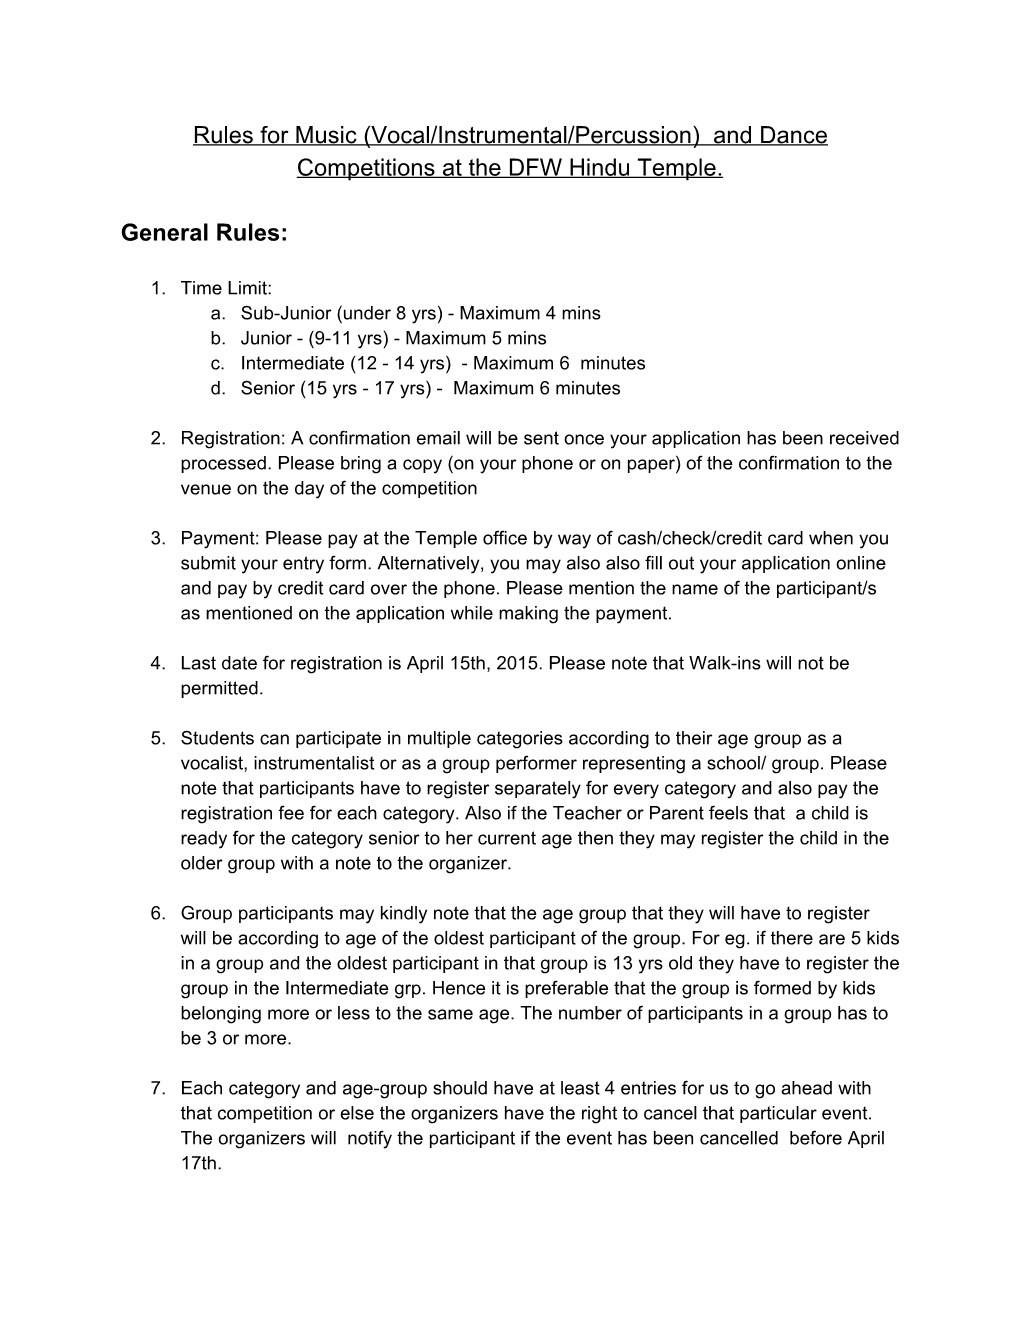 Rules for Music (Vocal/Instrumental/Percussion) and Dance Competitions at the DFW Hindu Temple. General Rules